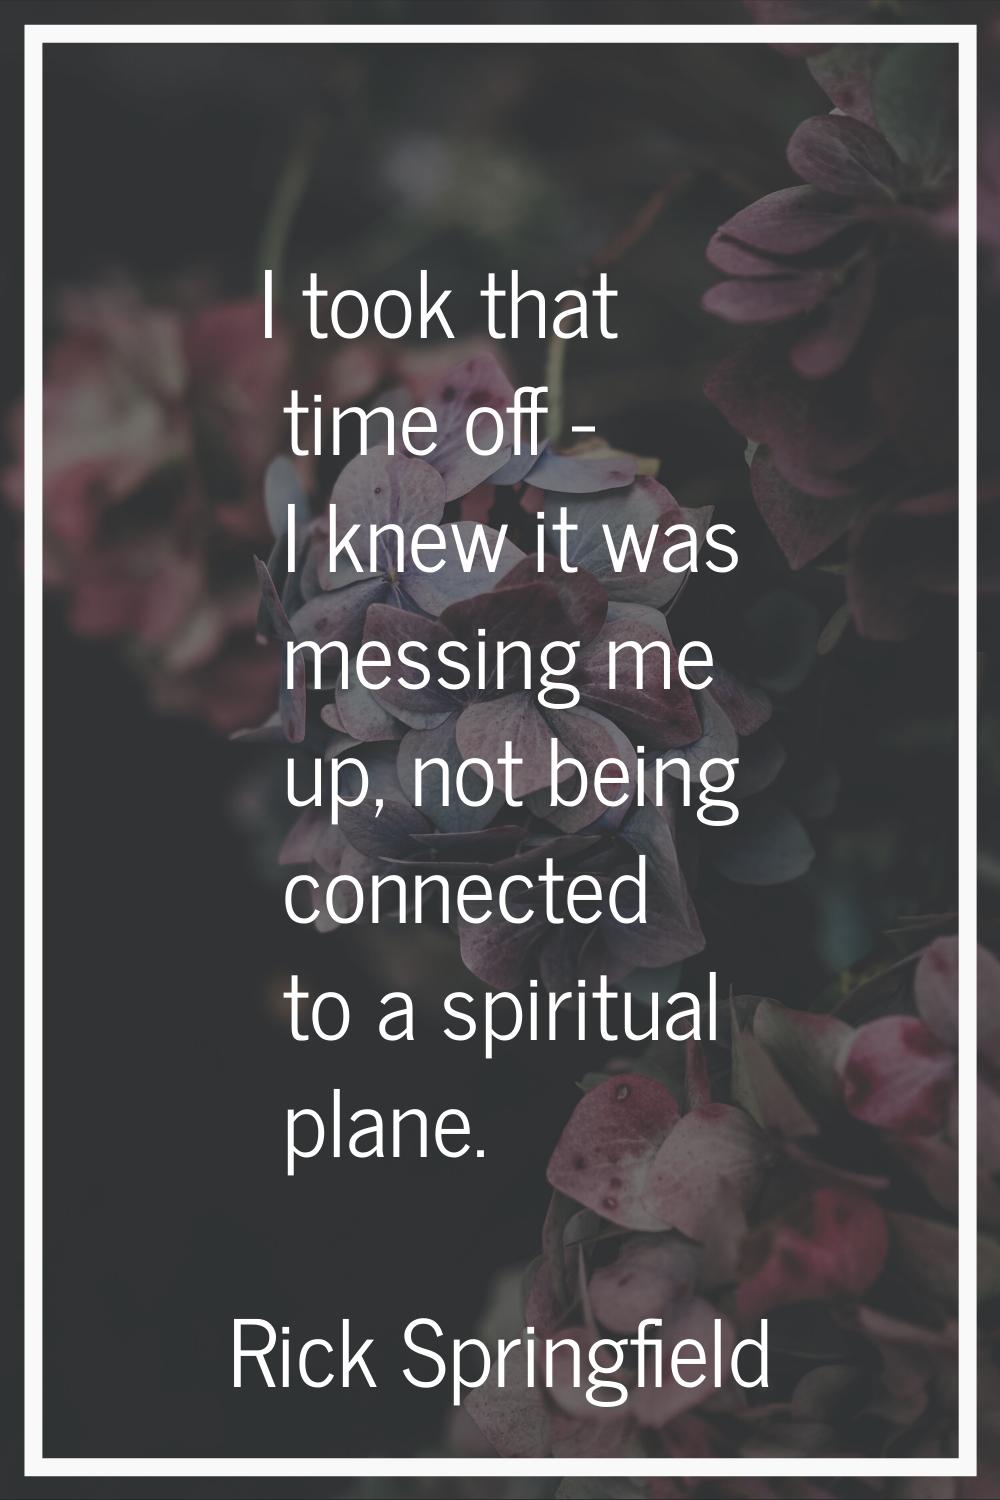 I took that time off - I knew it was messing me up, not being connected to a spiritual plane.